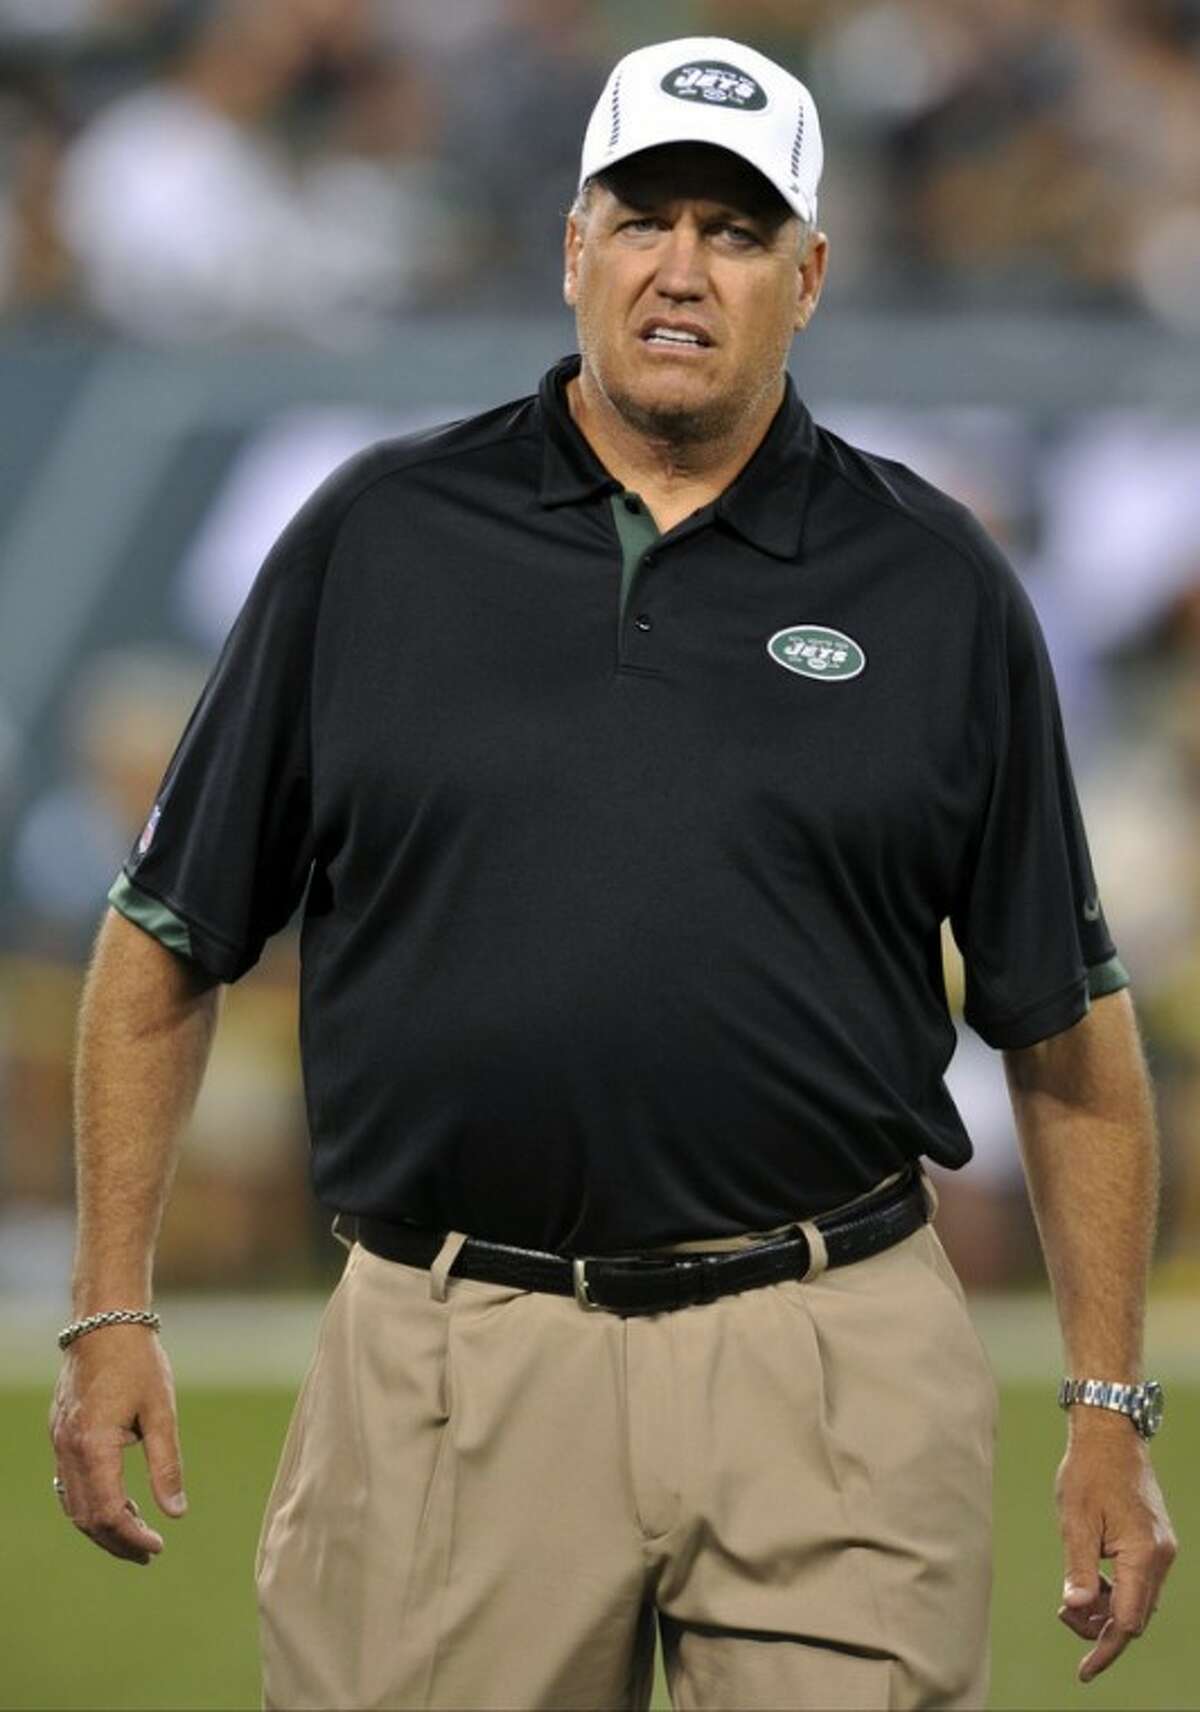 FILE - In this Aug. 26, 2012, file photo, New York Jets head coach Rex Ryan walks on the field before a preseason NFL football game against the Carolina Panthers in East Rutherford, N.J. The Jets' defense, featuring an improved secondary, is shaping up to be one of the toughest in the league but is being overshadowed by a quarterback controversy and the offense's inability to get into the end zone. The Jets are scheduled to begin their regular season on Sept. 9 at home against the Buffalo Bills. (AP Photo/Bill Kostroun, File)